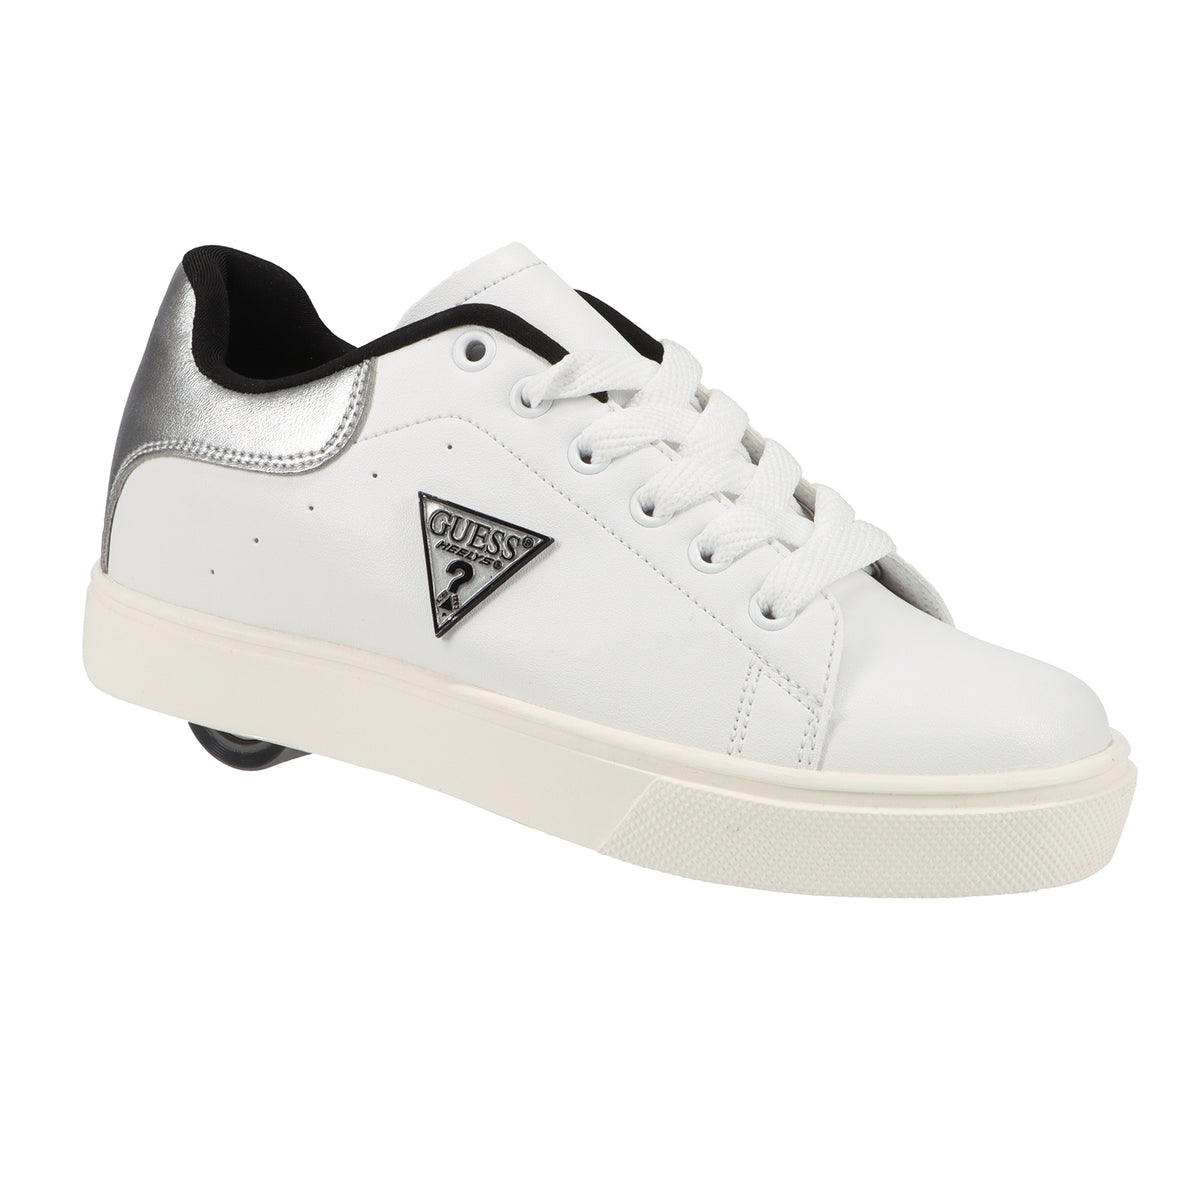 Women's Sneakers Shoes GUESS FL6PI4FAB12 White Synthetic